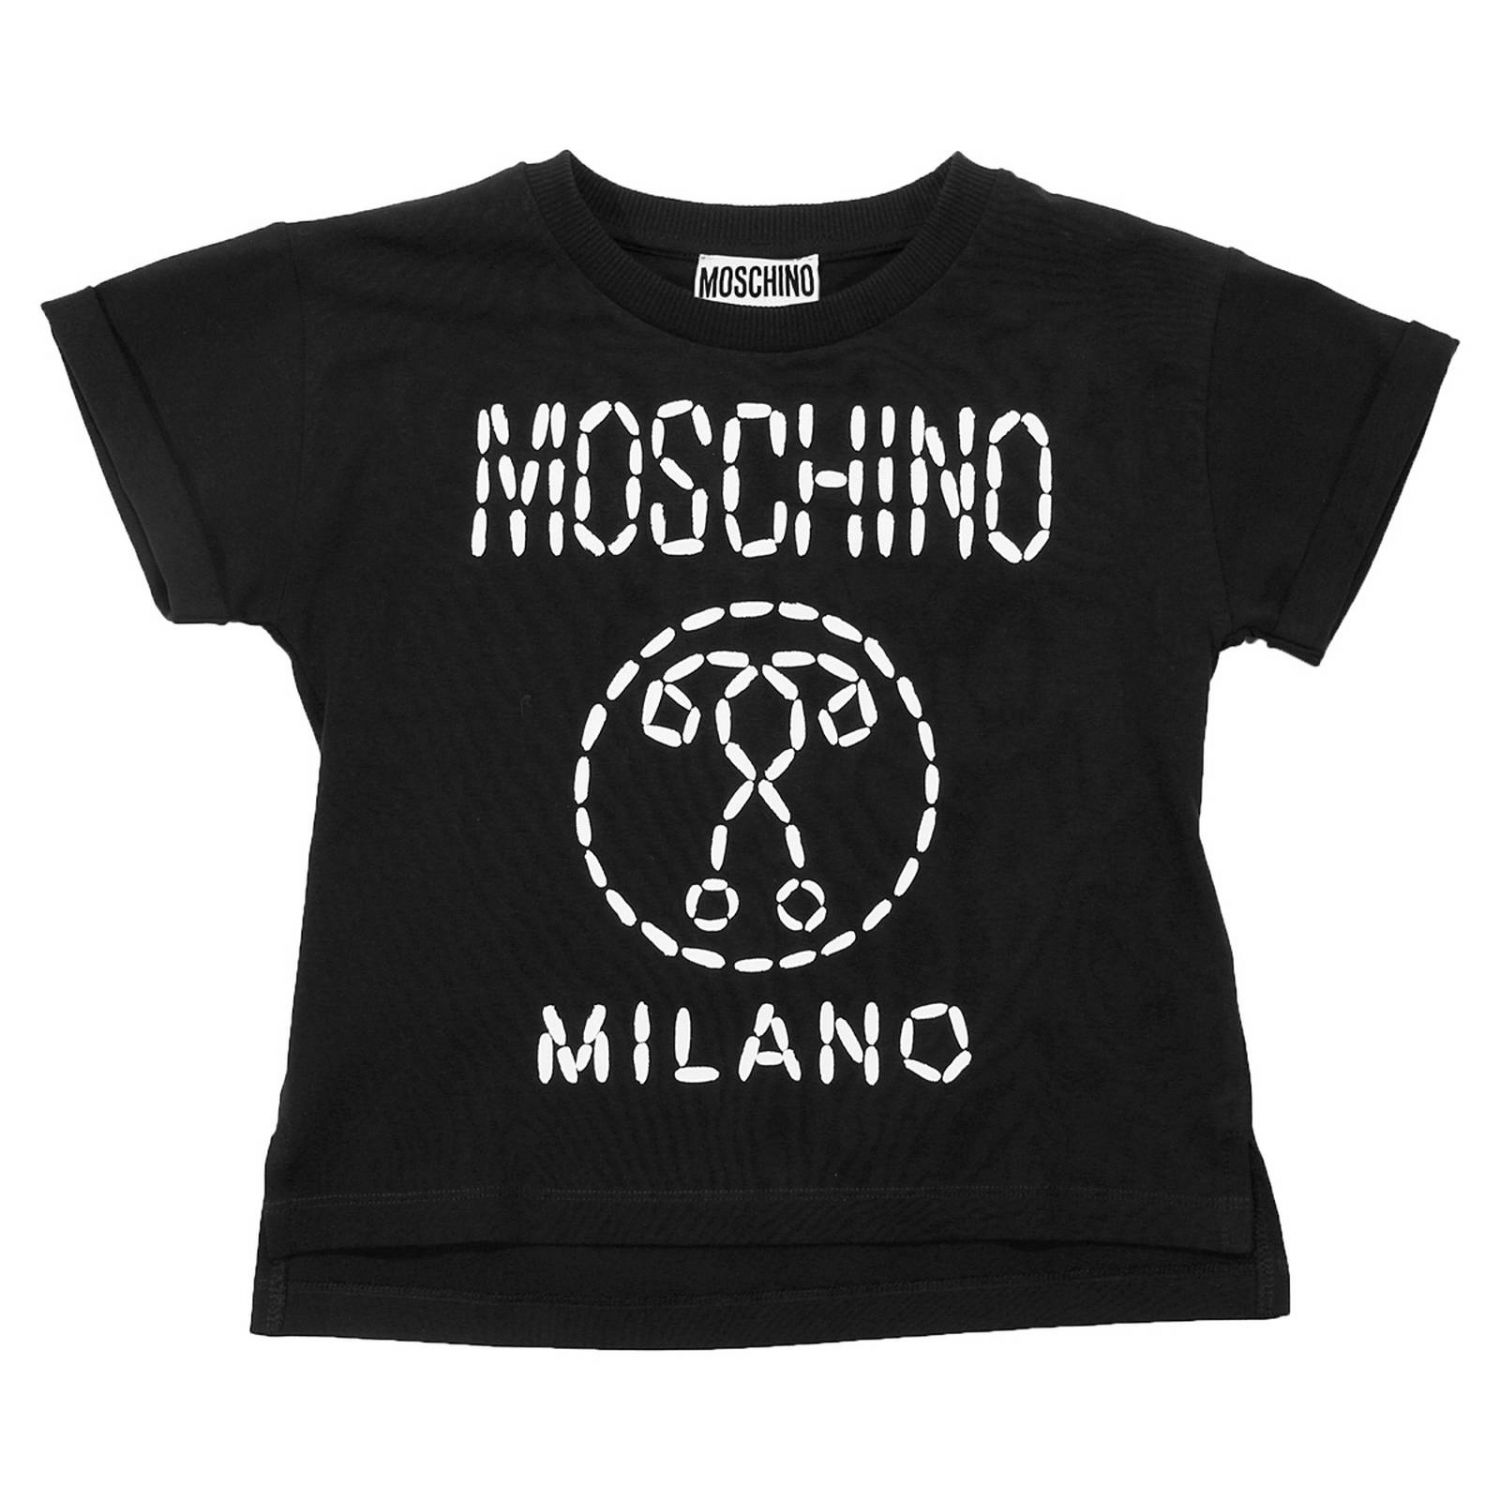 Moschino Kid Outlet: t-shirt for baby - Black | Moschino Kid t-shirt ...